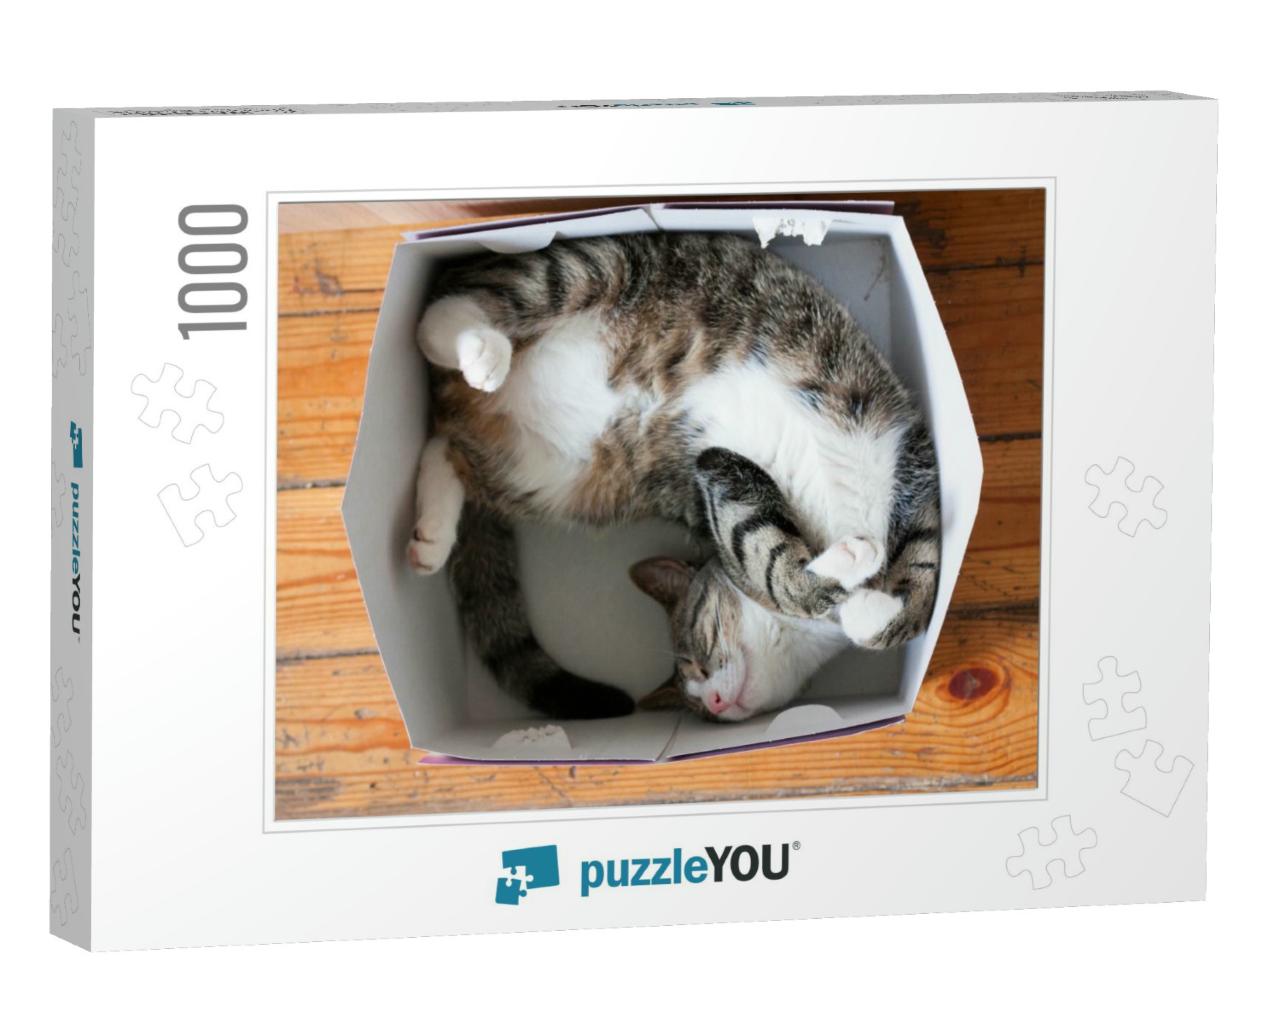 Striped Cat Sleeping in a Cardboard Box... Jigsaw Puzzle with 1000 pieces